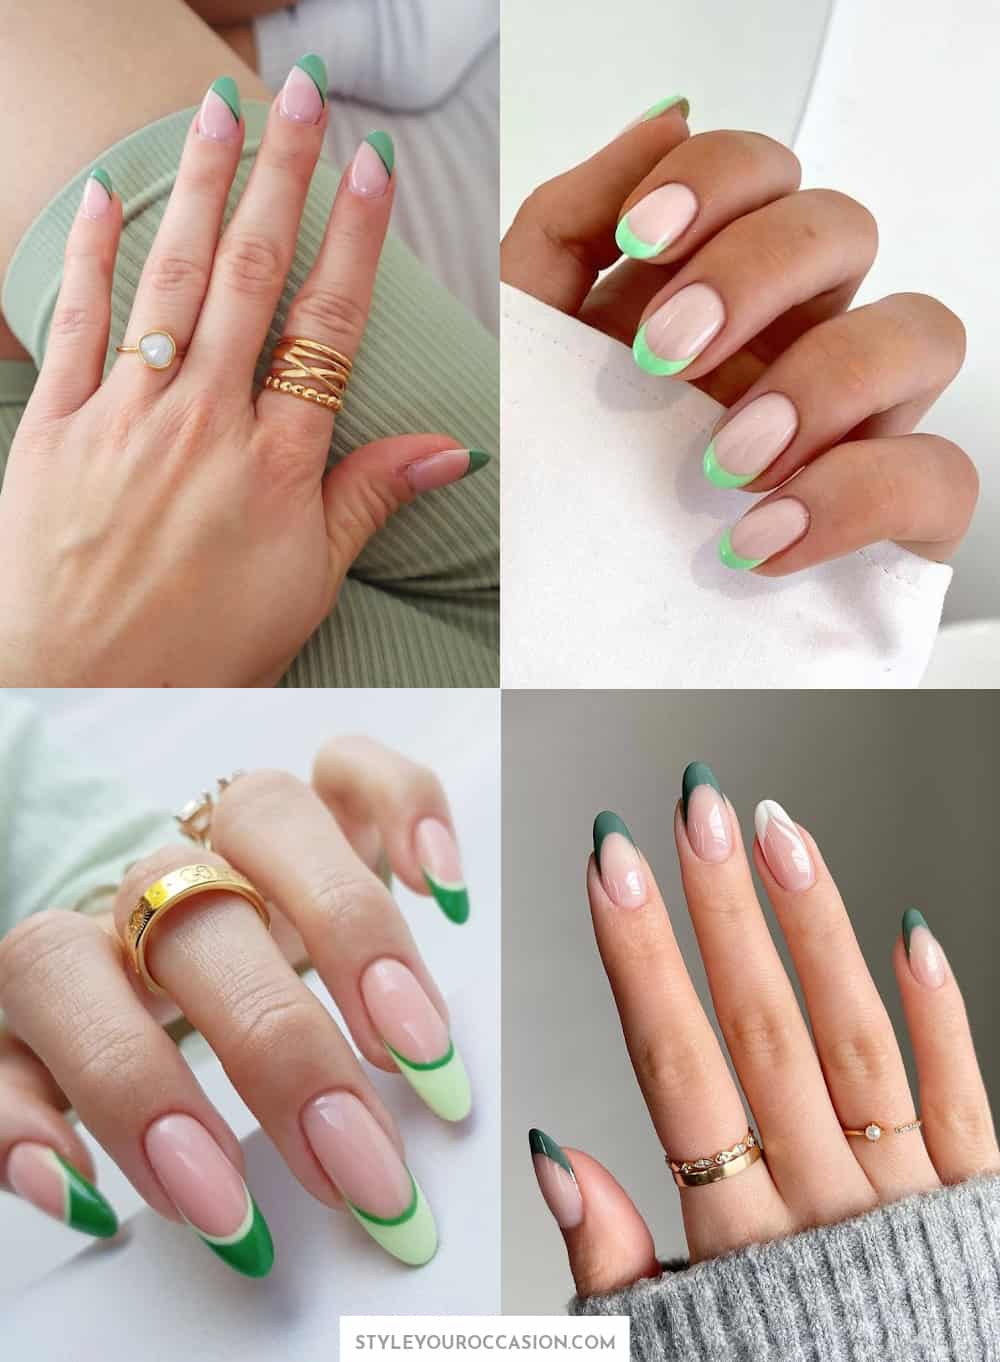 What Is a Reverse French Manicure? (with pictures)